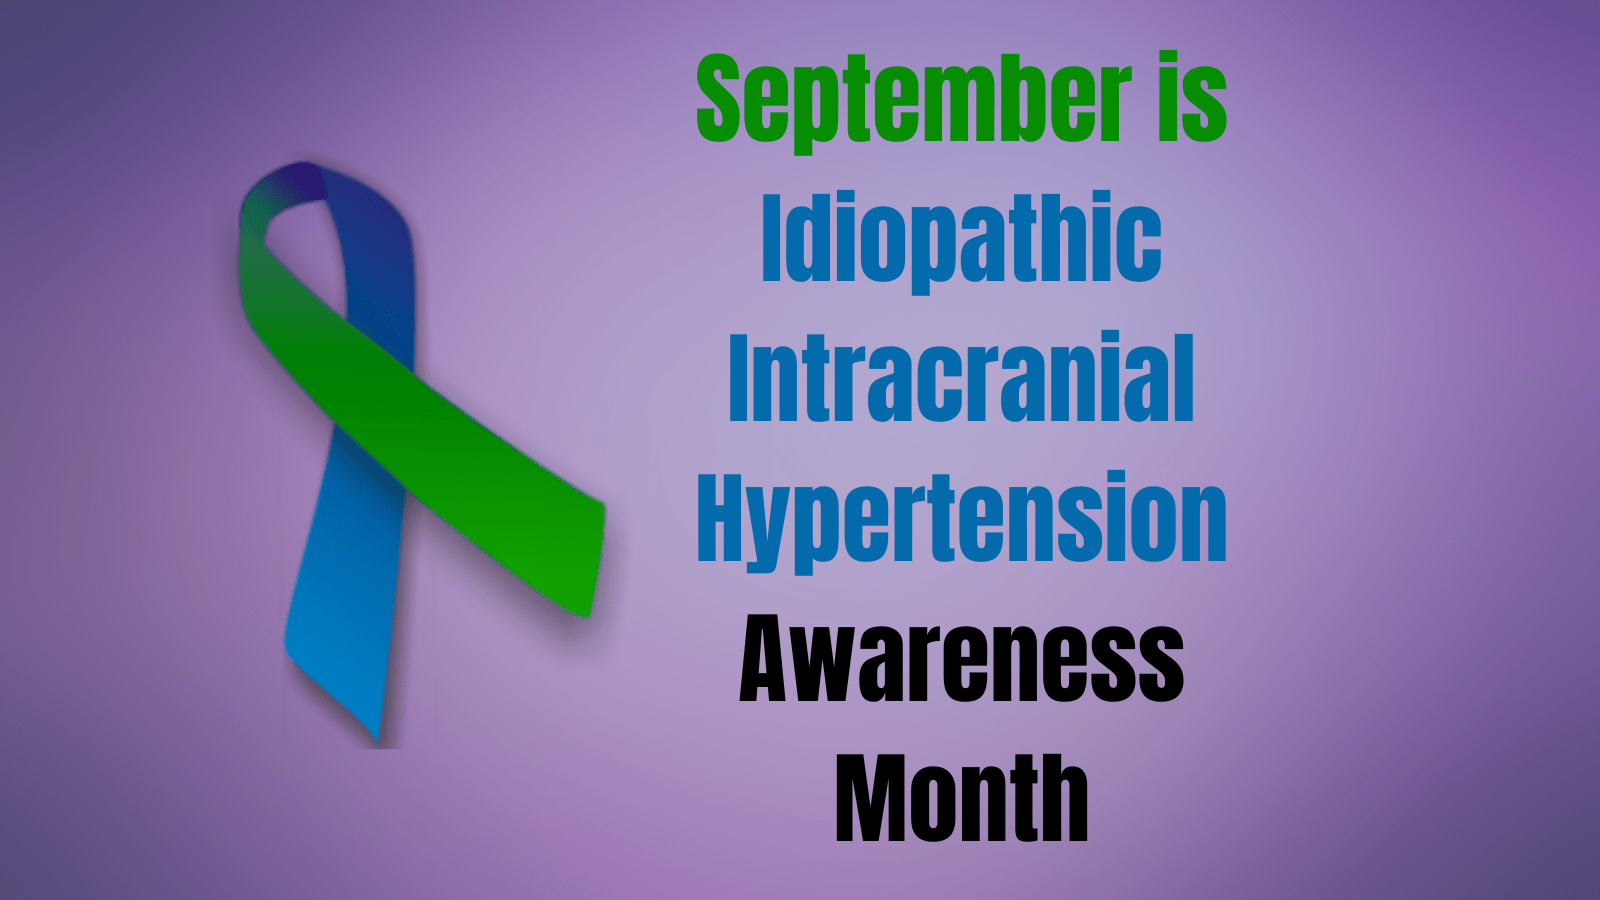 Idiopathic Intracranial Hypertension Awareness Month